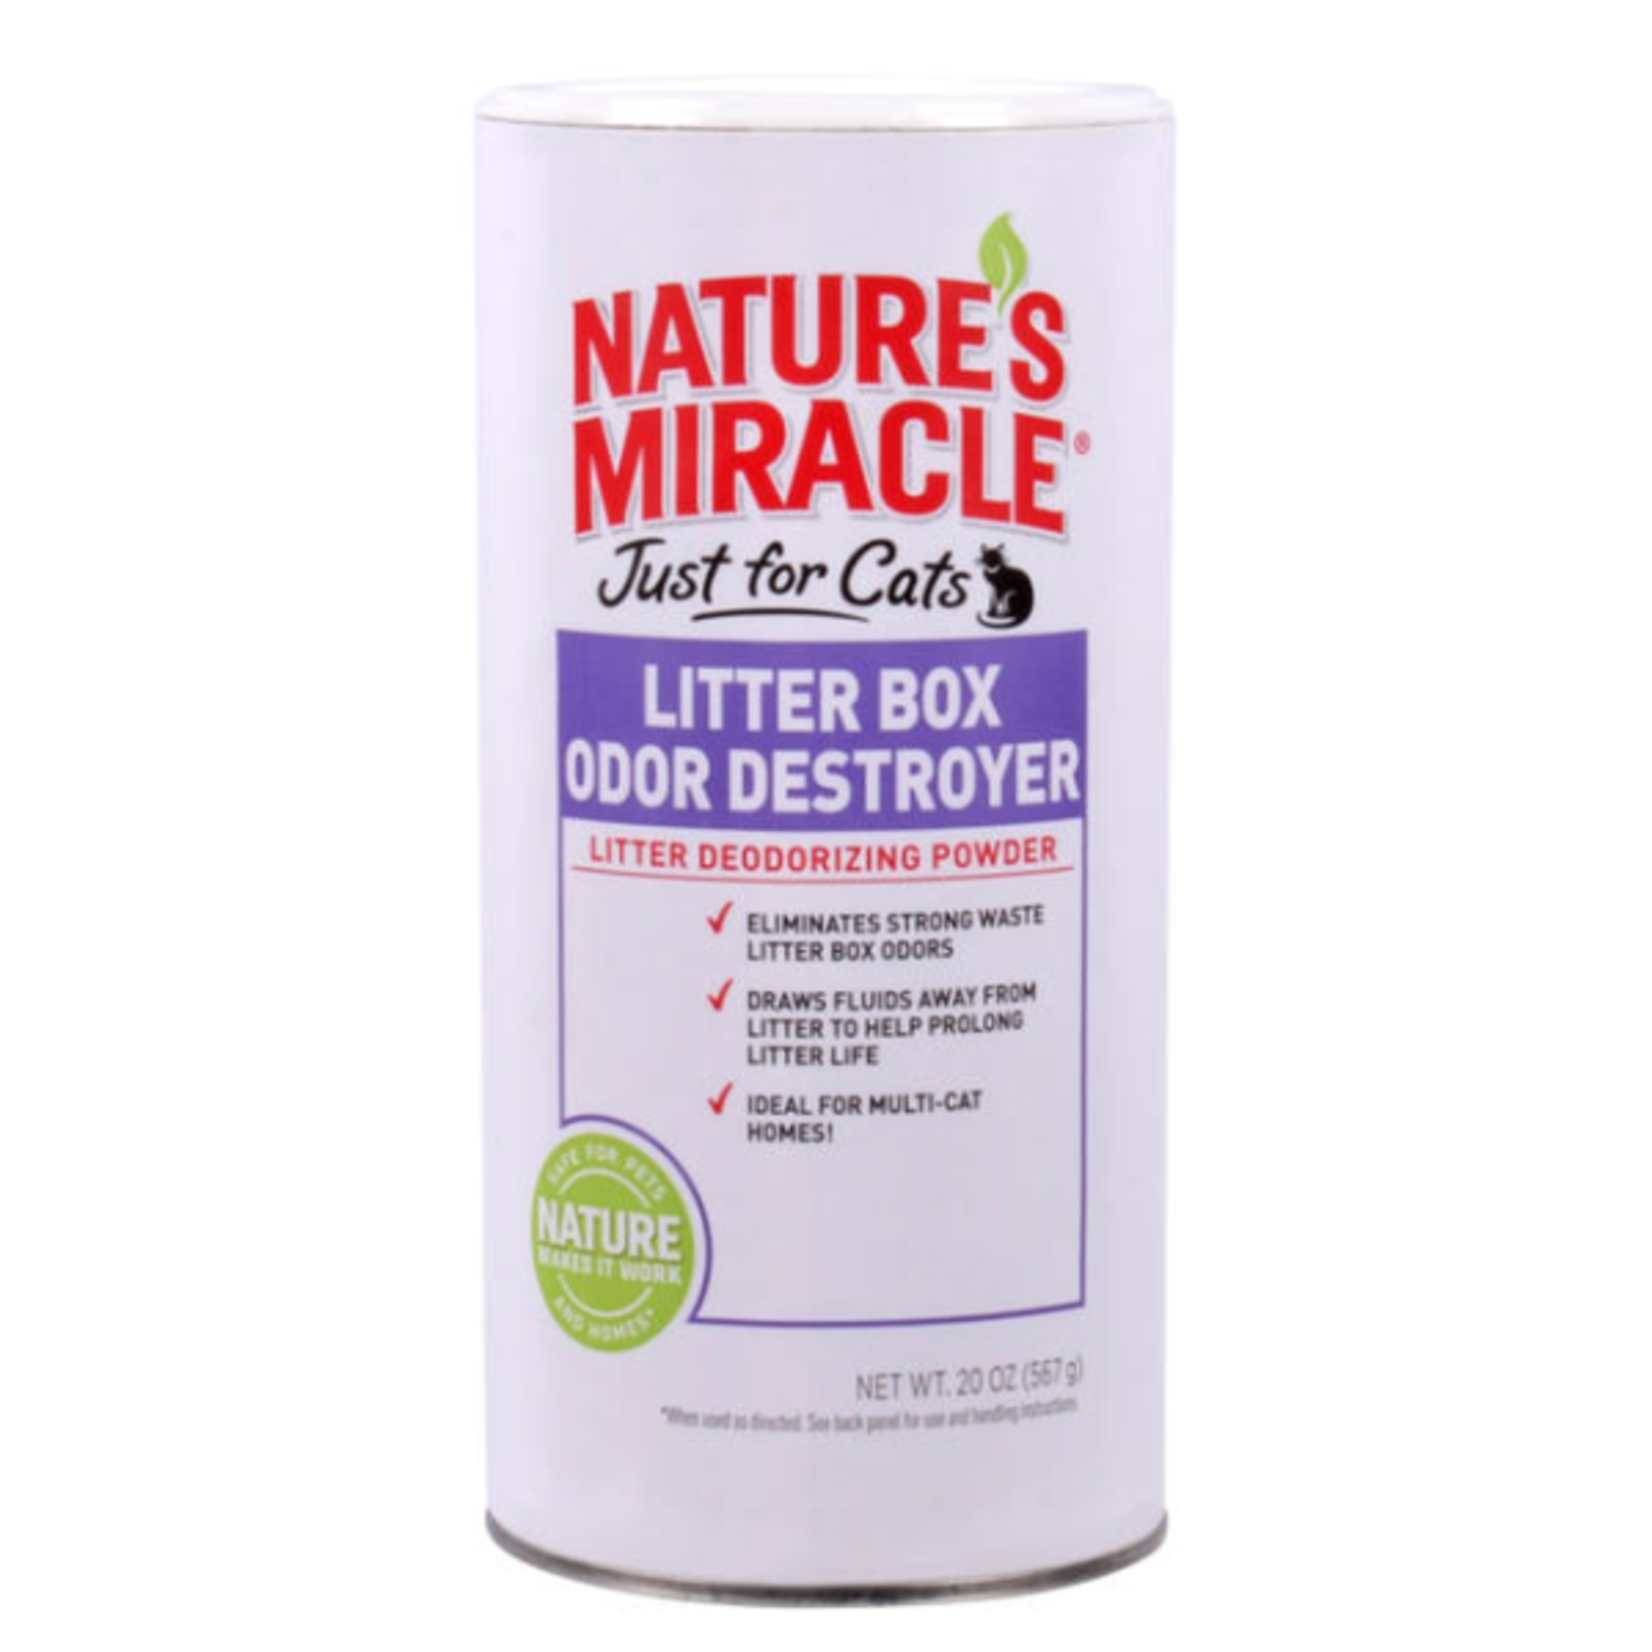 Nature's Miracle Litter Box Door Destroyer- Nature's Miracle